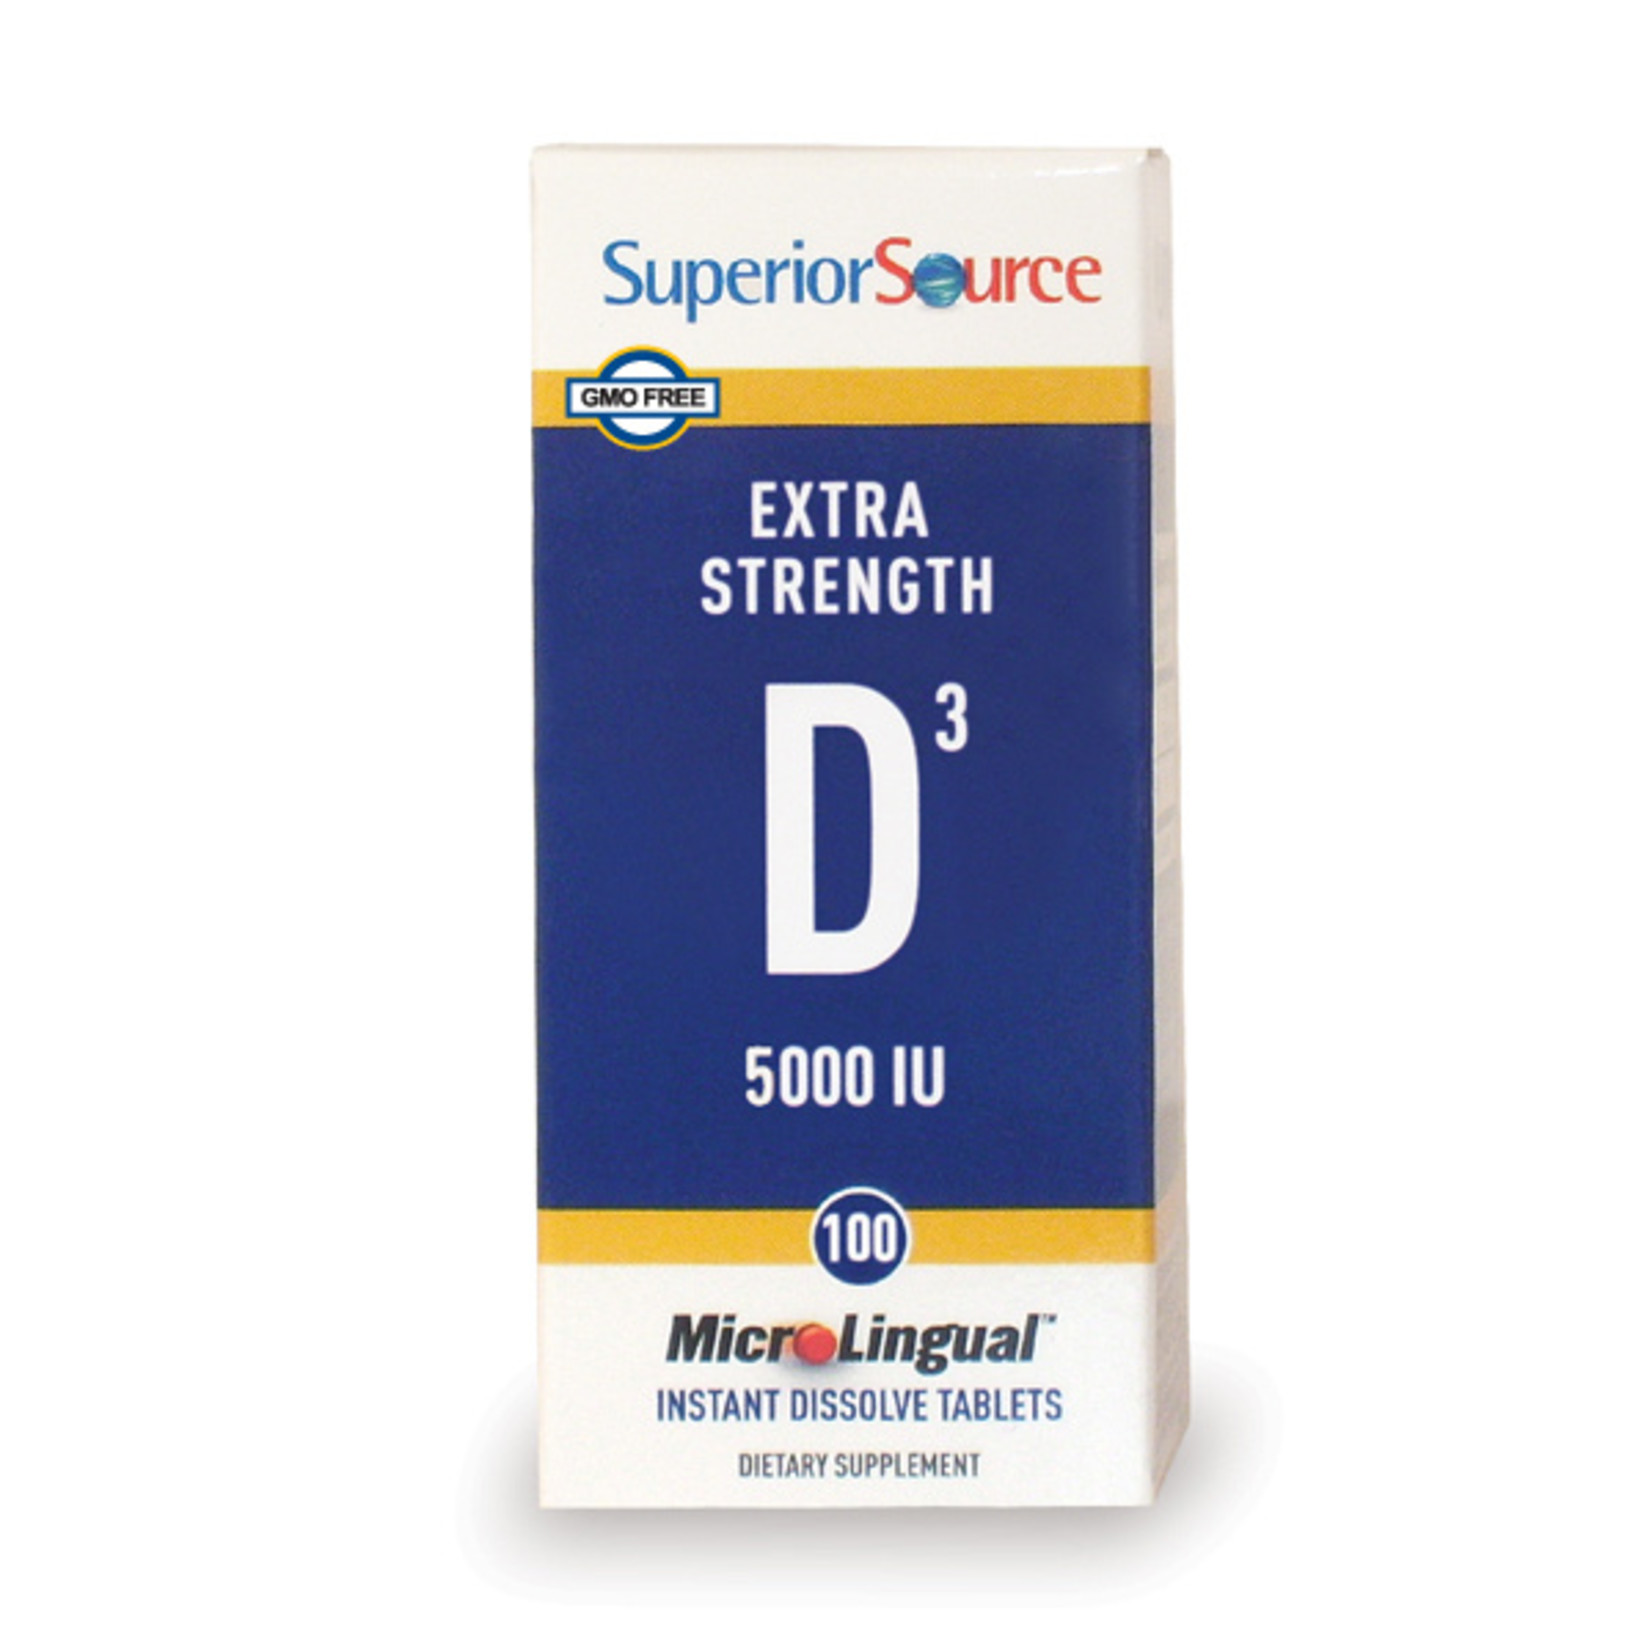 Superior Source Superior Source - Extra Strength Vitamin D3 5000 - 100 Tablets